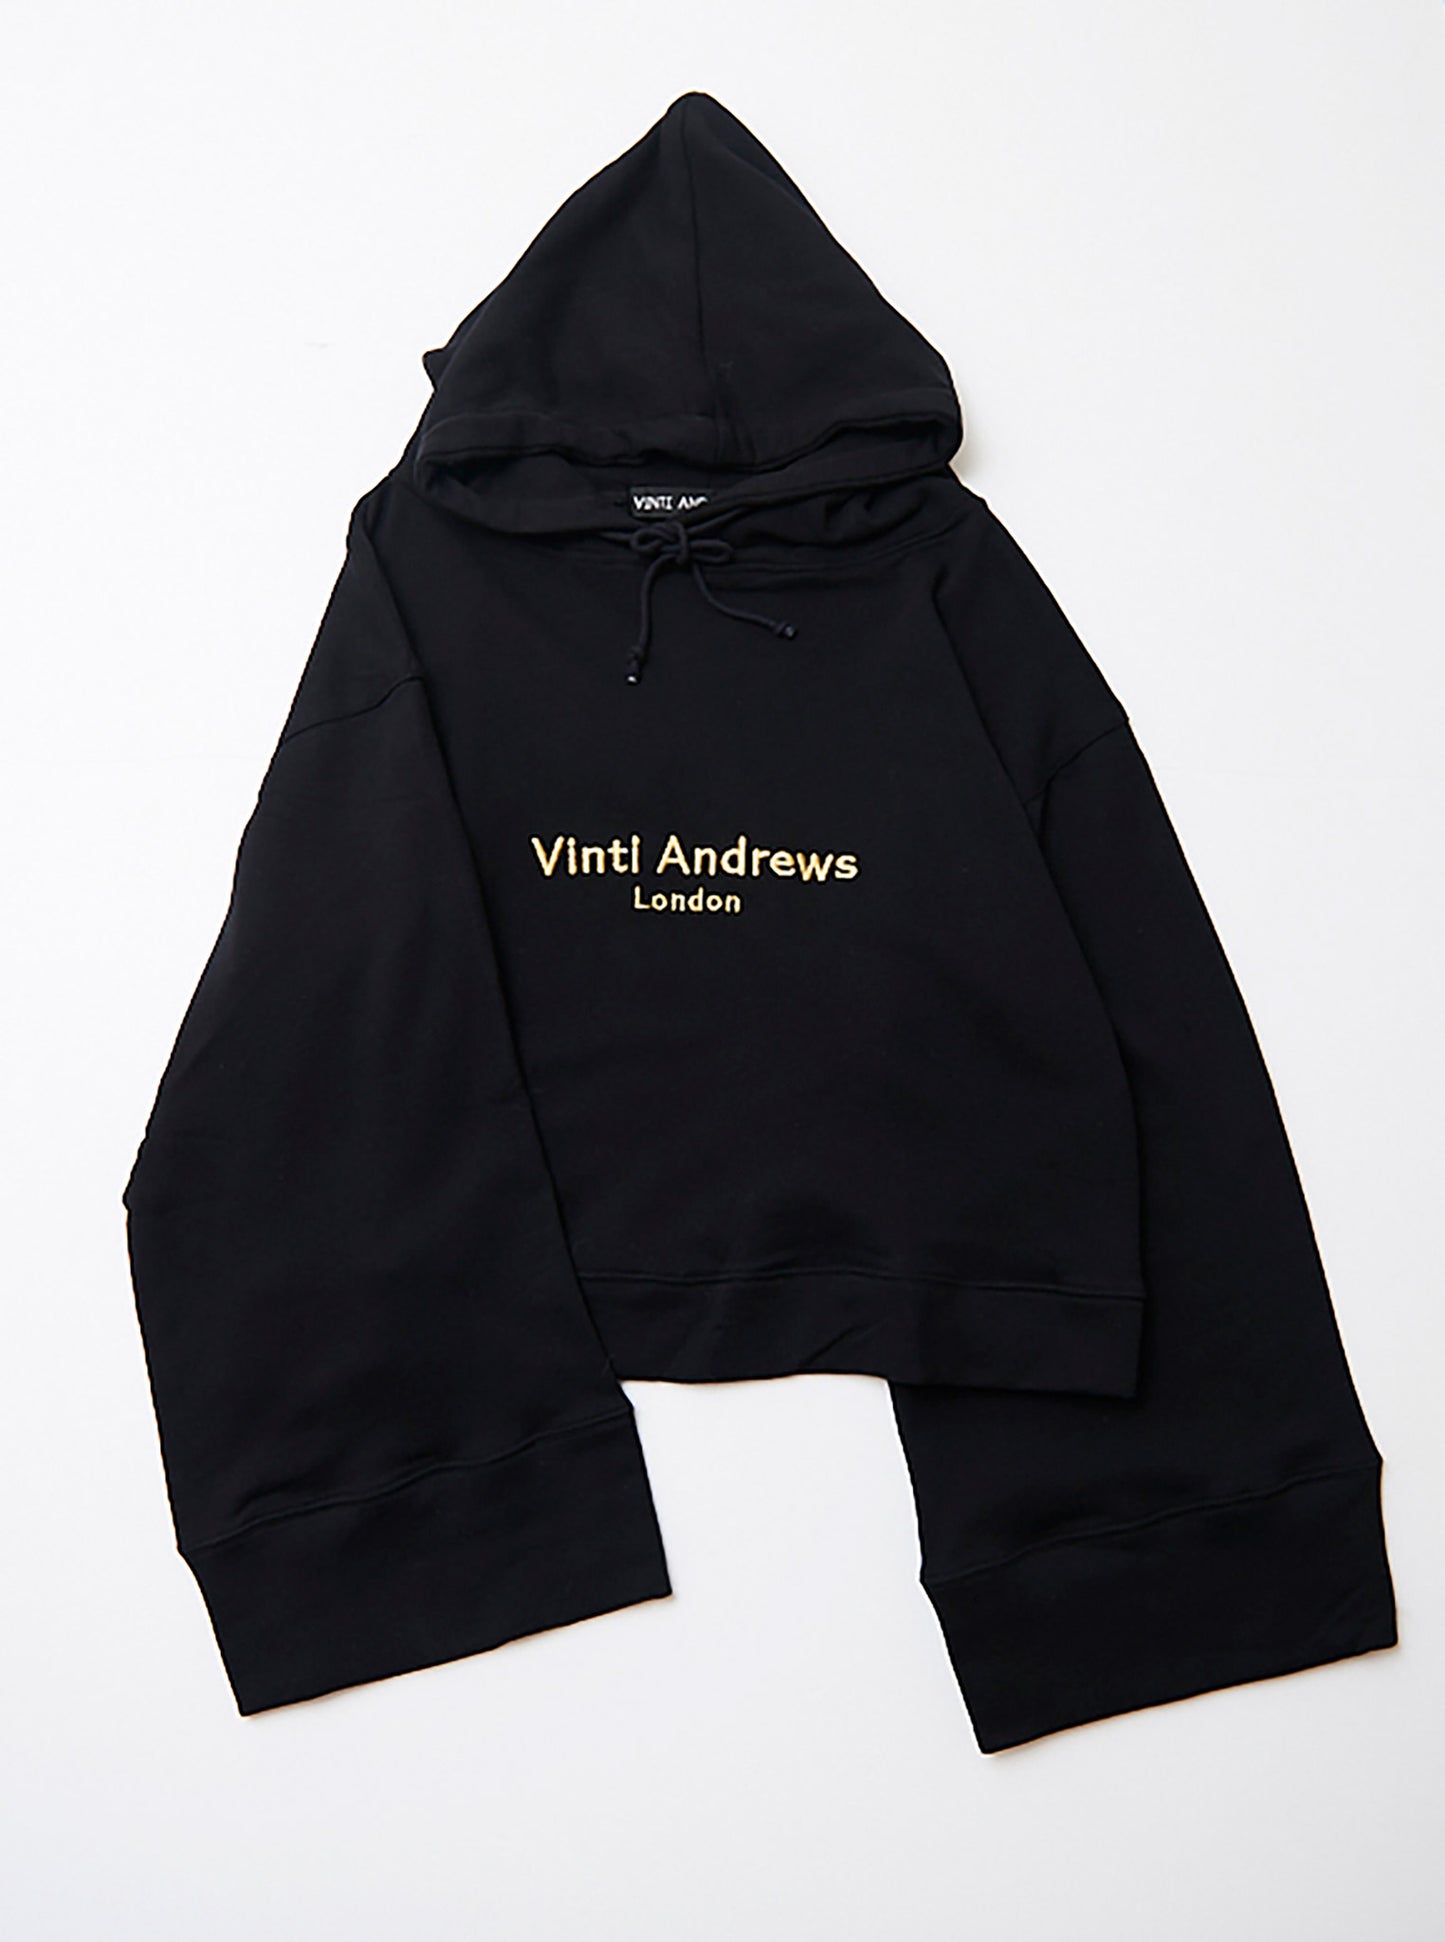 Vinti Andrews Golden Embroidery Cropped Black Hoody